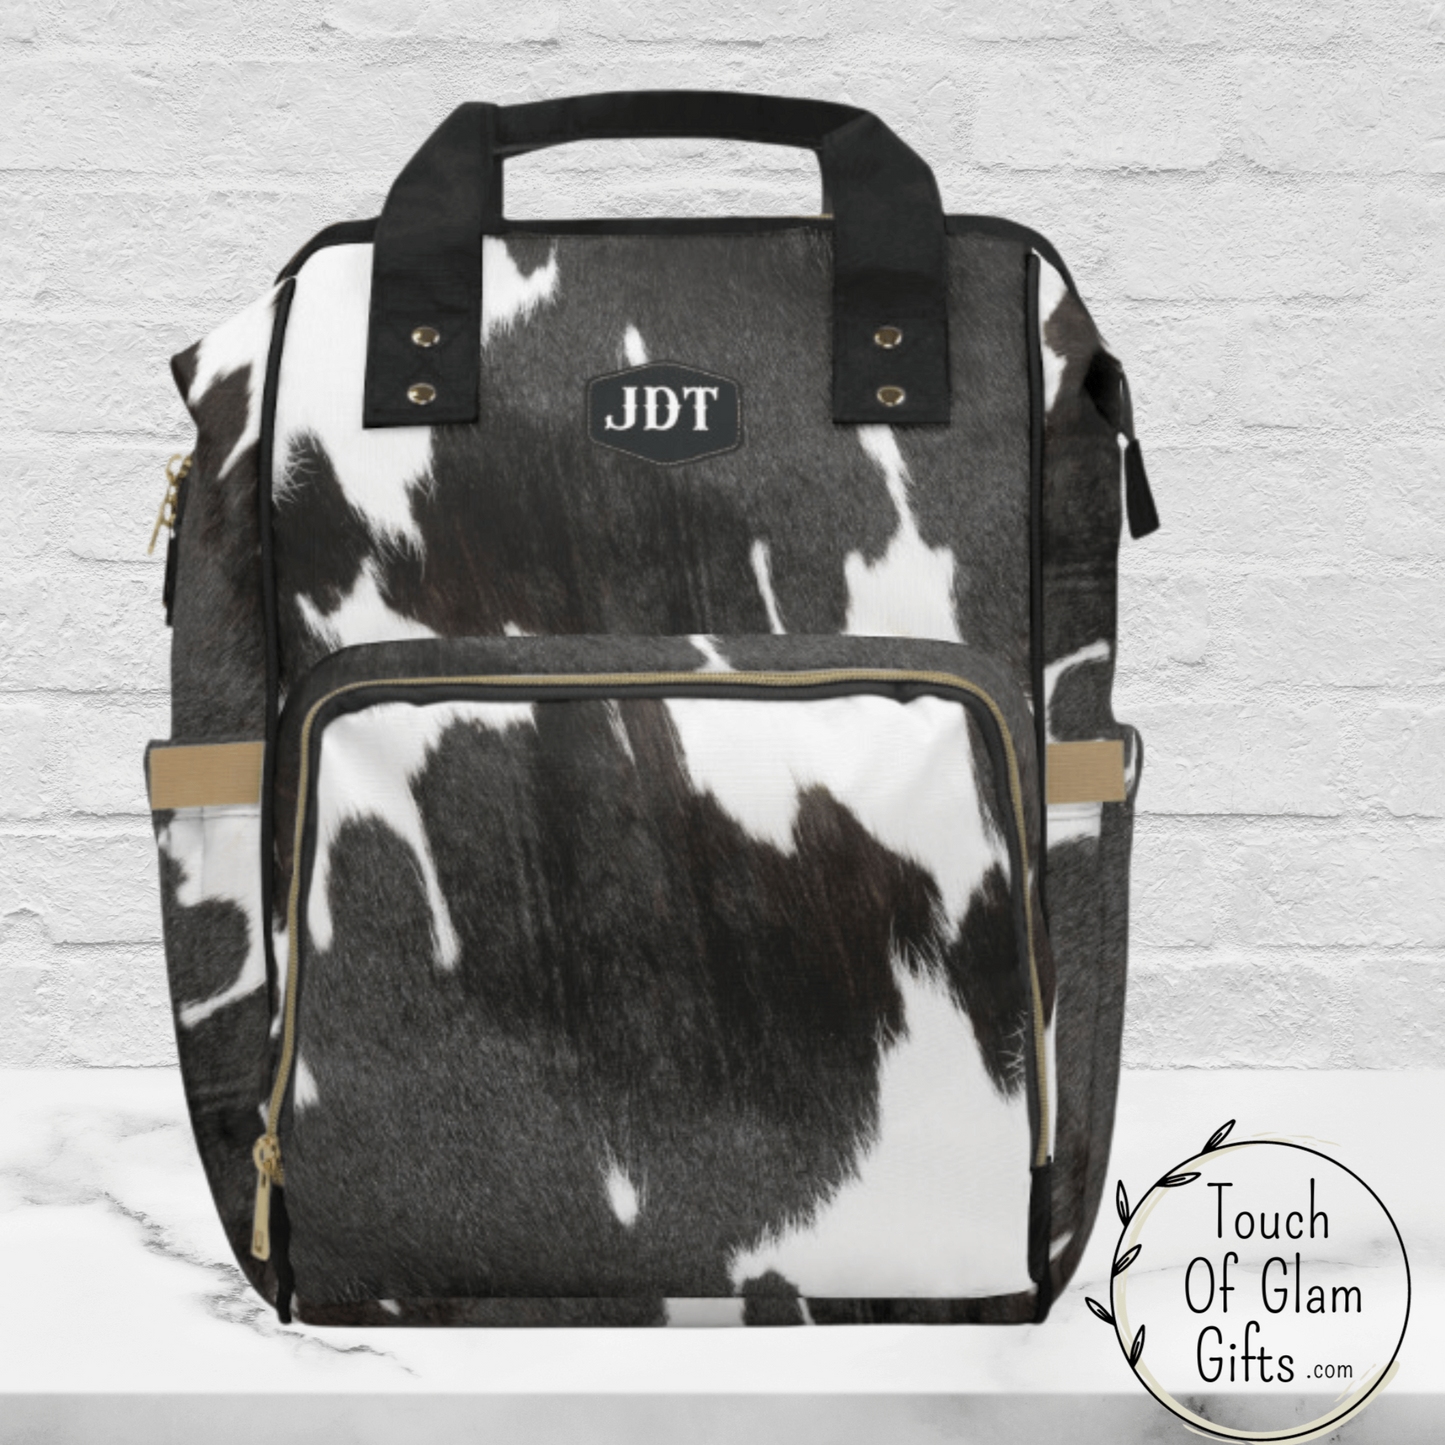 Our cow print diaper backpack makes a great personalized baby shower gift because you can add monogram initials for the western baby shower gift.